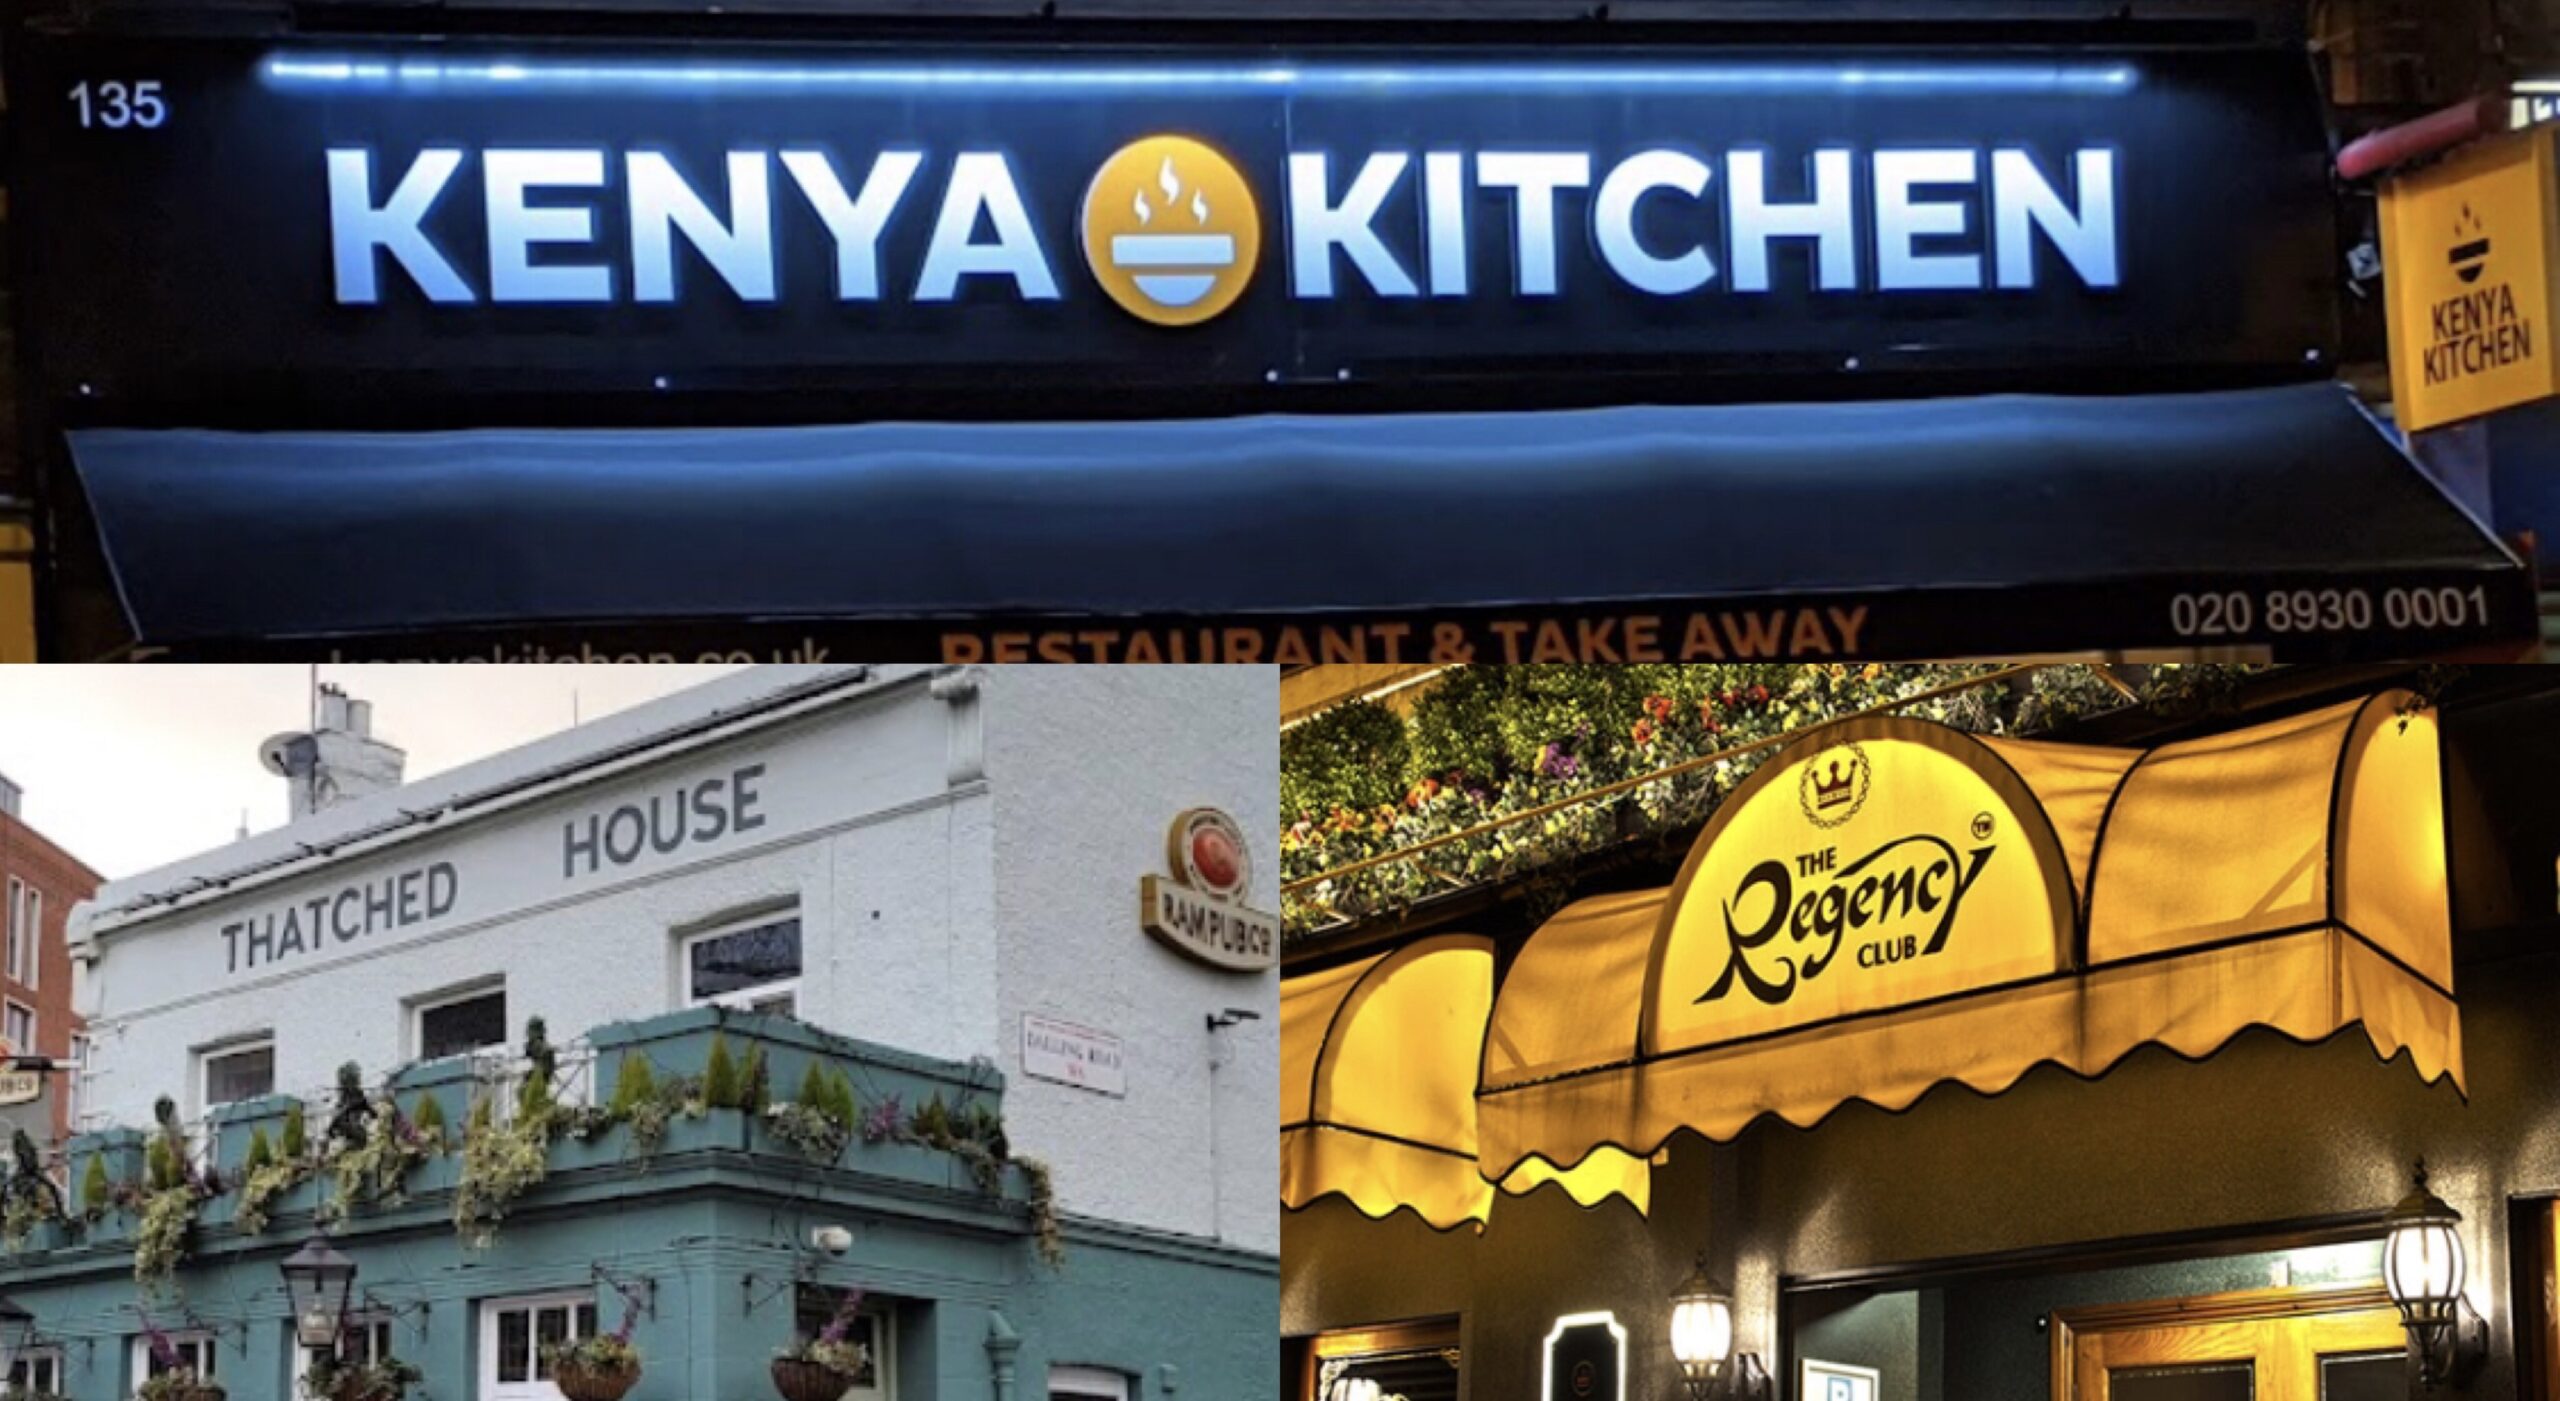 Kenya Kitchen, Thatched Out and The Recency Club PHOTOS/Google